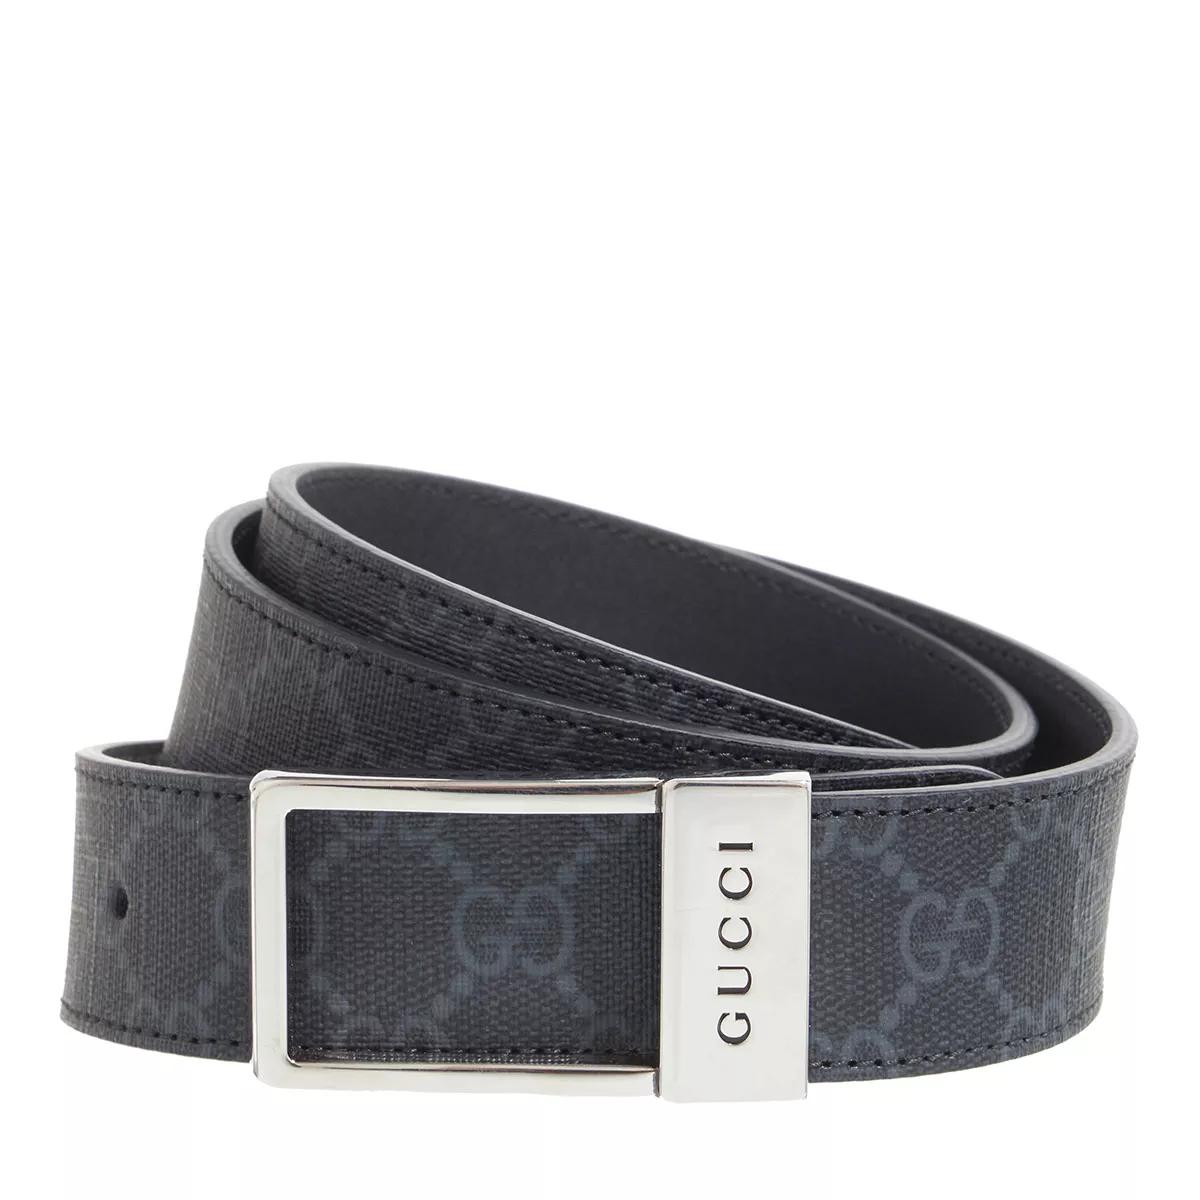 GG belt with rectangular buckle in blue and black Supreme